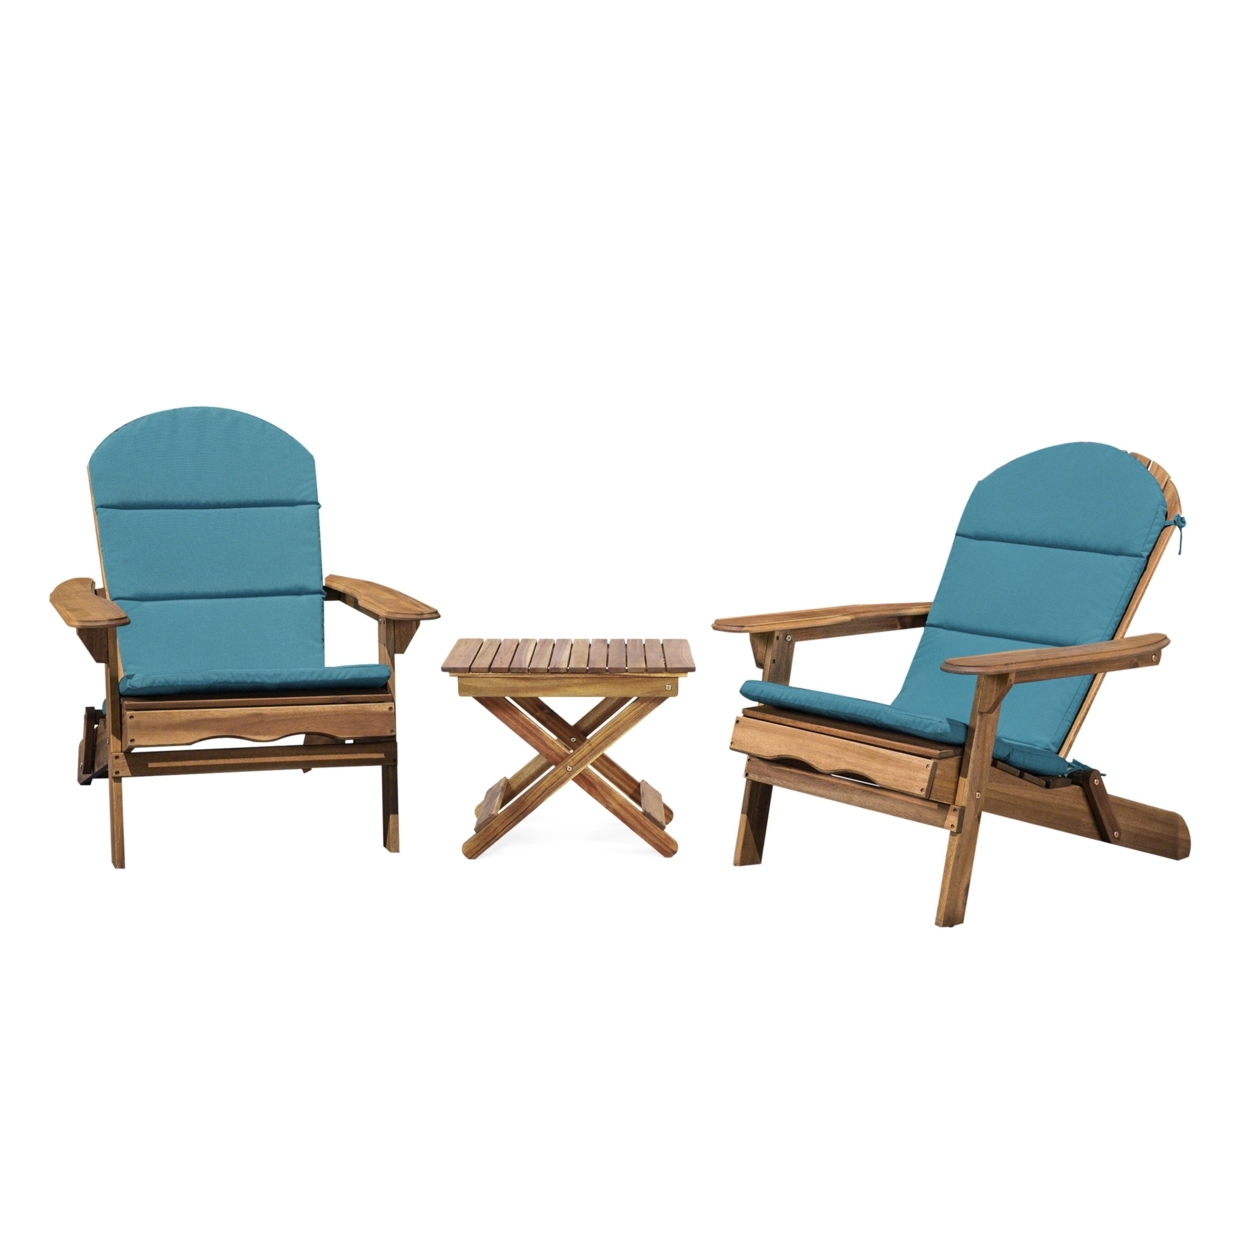 Reed Outdoor 2 Seater Acacia Wood Chat Set With Water Resistant Cushions - Dark Gray/navy Blue